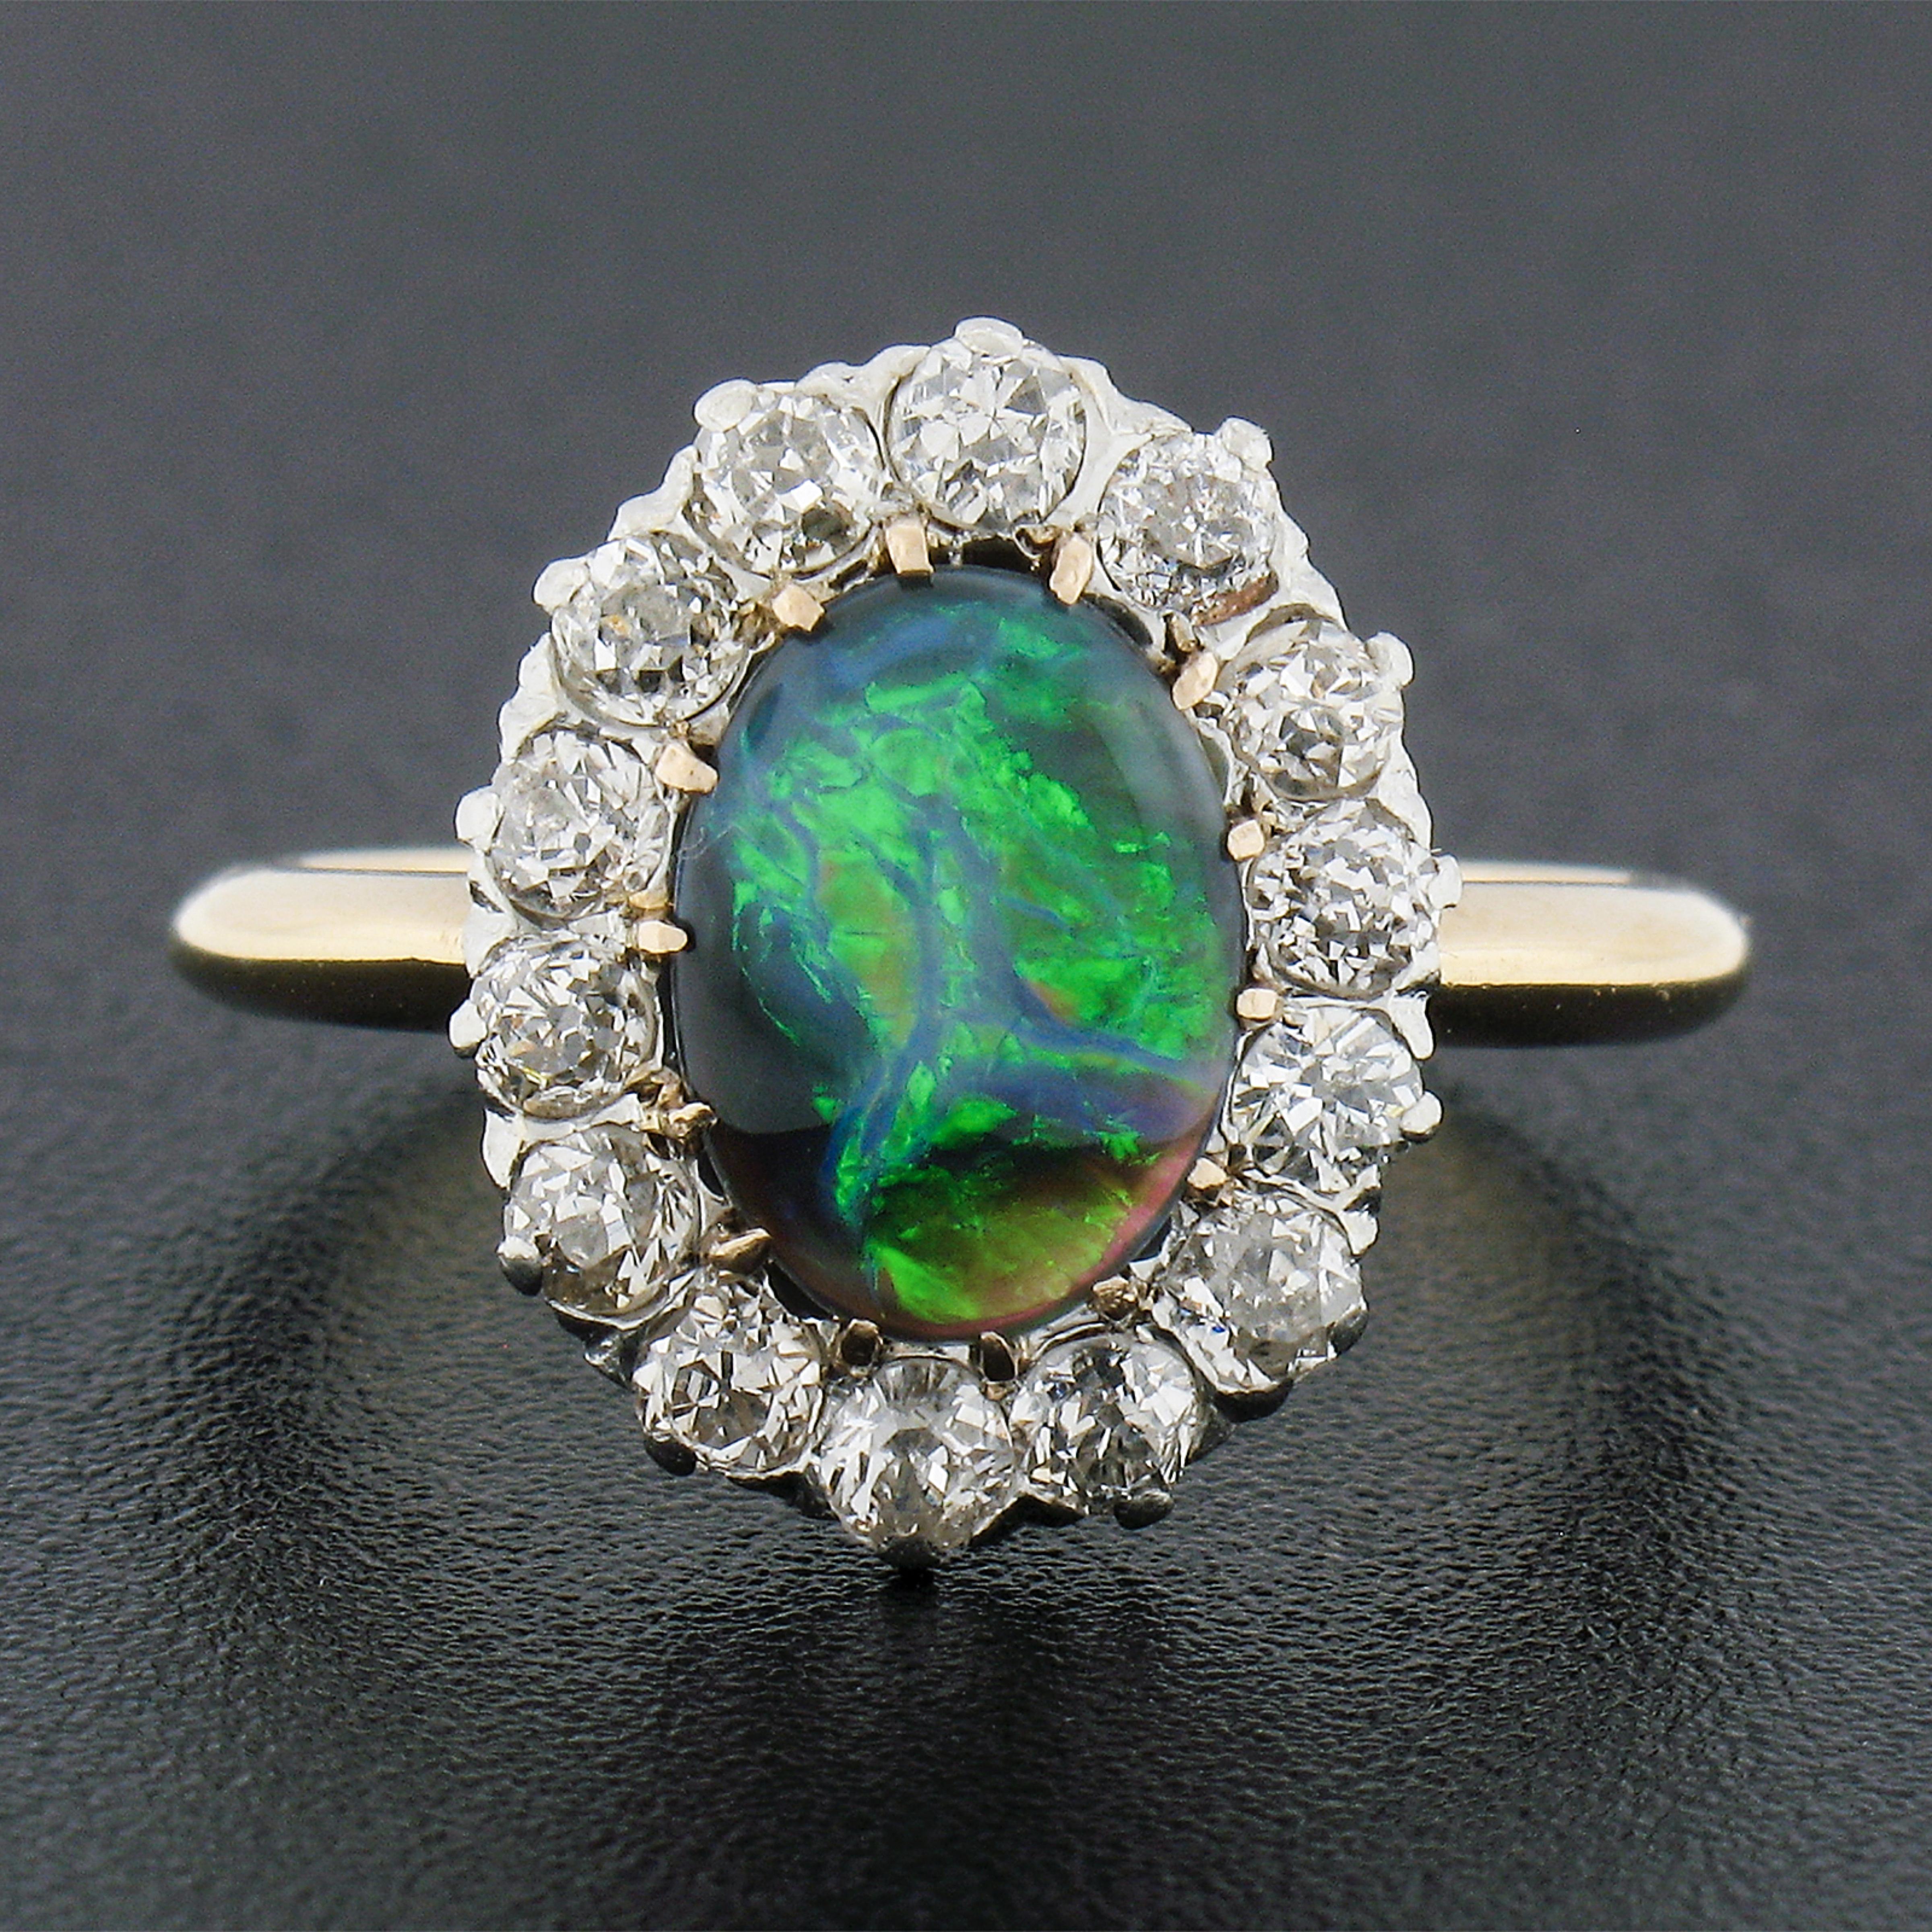 This magnificent antique ring is crafted in solid 14k gold with a platinum top and features a breathtaking gray opal gemstone neatly and elegantly multi-prong set at the center of stunning halo design. The gray opal is in excellent condition, has no